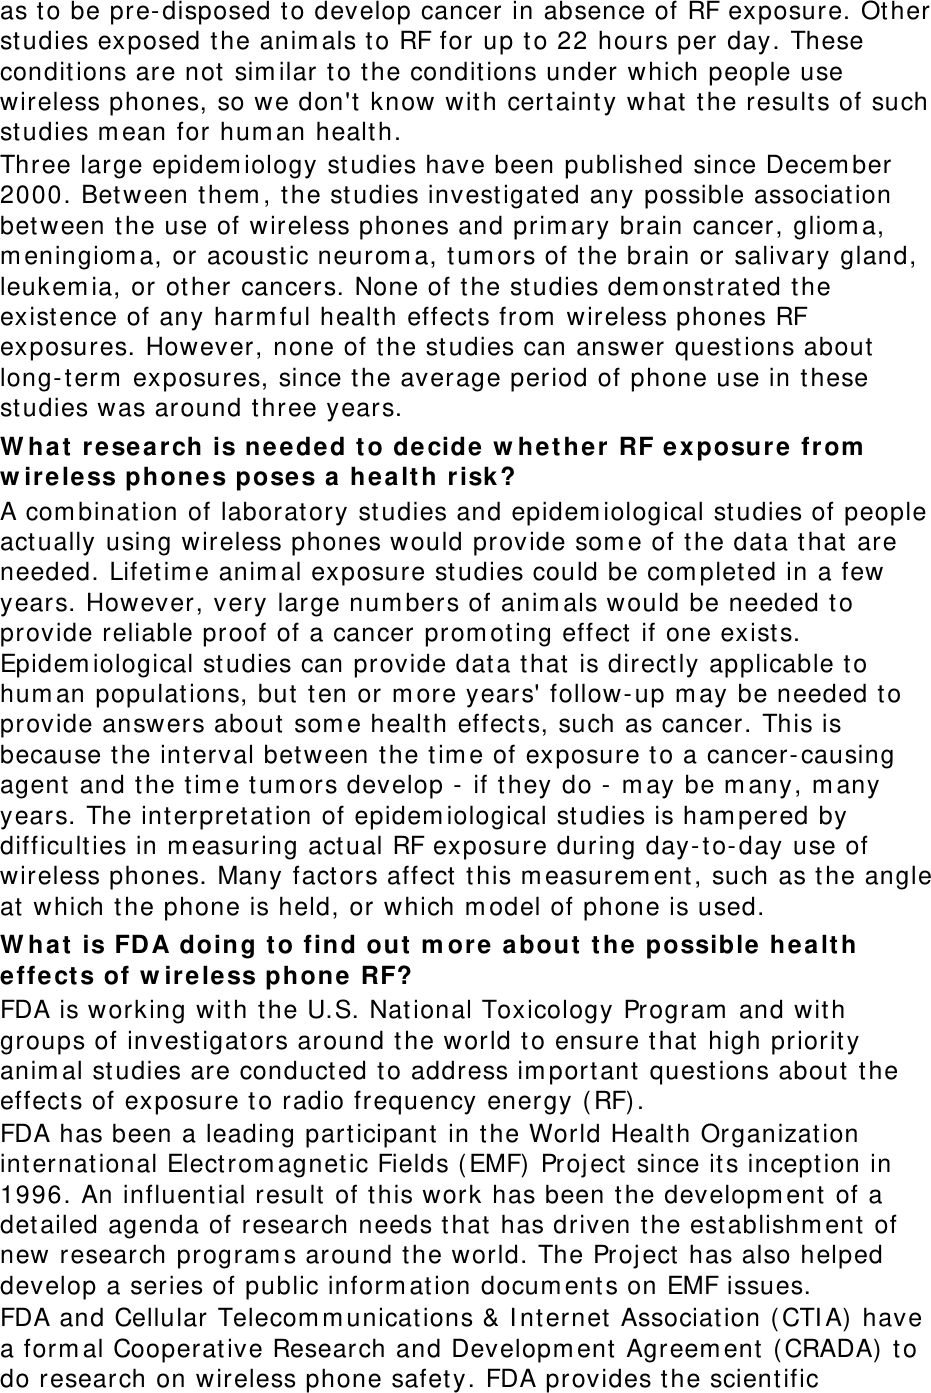 as t o be pre-disposed t o develop cancer in absence of RF exposure. Ot her studies exposed t he anim als t o RF for up to 22 hours per day. These conditions are not sim ilar t o t he conditions under which people use wireless phones, so we don&apos;t  know wit h cert ainty what the results of such studies m ean for hum an healt h. Three large epidem iology st udies have been published since Decem ber 2000. Bet ween t hem , t he studies invest igat ed any possible associat ion bet ween t he use of wireless phones and prim ary brain cancer, gliom a, m eningiom a, or acoust ic neurom a, t um ors of t he brain or salivary gland, leukem ia, or other cancers. None of t he studies dem onstrated t he existence of any harm ful health effect s from  wireless phones RF exposures. However, none of t he studies can answer quest ions about  long- term  exposures, since t he average period of phone use in these studies was around three years. W ha t re sear ch is needed t o de cide w hether RF e xposure fr om  w irele ss phones pose s a healt h risk ? A com bination of laboratory studies and epidem iological st udies of people act ually using wireless phones would provide som e of t he data t hat are needed. Lifetim e anim al exposure st udies could be com pleted in a few years. However, very large num bers of anim als would be needed to provide reliable proof of a cancer prom ot ing effect  if one exists. Epidem iological studies can provide data t hat is direct ly applicable t o hum an populat ions, but ten or m ore years&apos; follow- up m ay be needed t o provide answers about som e health effect s, such as cancer. This is because t he interval bet ween t he t im e of exposure to a cancer- causing agent  and the tim e tum ors develop -  if t hey do -  m ay be m any, m any years. The interpretation of epidem iological studies is ham pered by difficulties in m easuring act ual RF exposure during day- t o-day use of wireless phones. Many fact ors affect  t his m easurem ent , such as t he angle at  which t he phone is held, or which m odel of phone is used. W ha t is FD A doing t o find out  m ore about t he possible  he alt h effects of w ire less phone RF? FDA is working wit h the U.S. National Toxicology Program  and with groups of invest igat ors around the world t o ensure t hat high priority anim al studies are conduct ed t o address im port ant quest ions about  t he effect s of exposure to radio frequency energy ( RF). FDA has been a leading participant  in the World Health Organization internat ional Elect rom agnet ic Fields ( EMF)  Project since its inception in 1996. An influent ial result of t his work has been t he developm ent  of a det ailed agenda of research needs that  has driven t he establishm ent  of new research program s around t he world. The Project has also helped develop a series of public inform ation docum ent s on EMF issues. FDA and Cellular Telecom m unicat ions &amp; I nt ernet Association ( CTI A)  have a form al Cooperative Research and Developm ent  Agreem ent  ( CRADA)  t o do research on wireless phone safety. FDA provides t he scient ific 